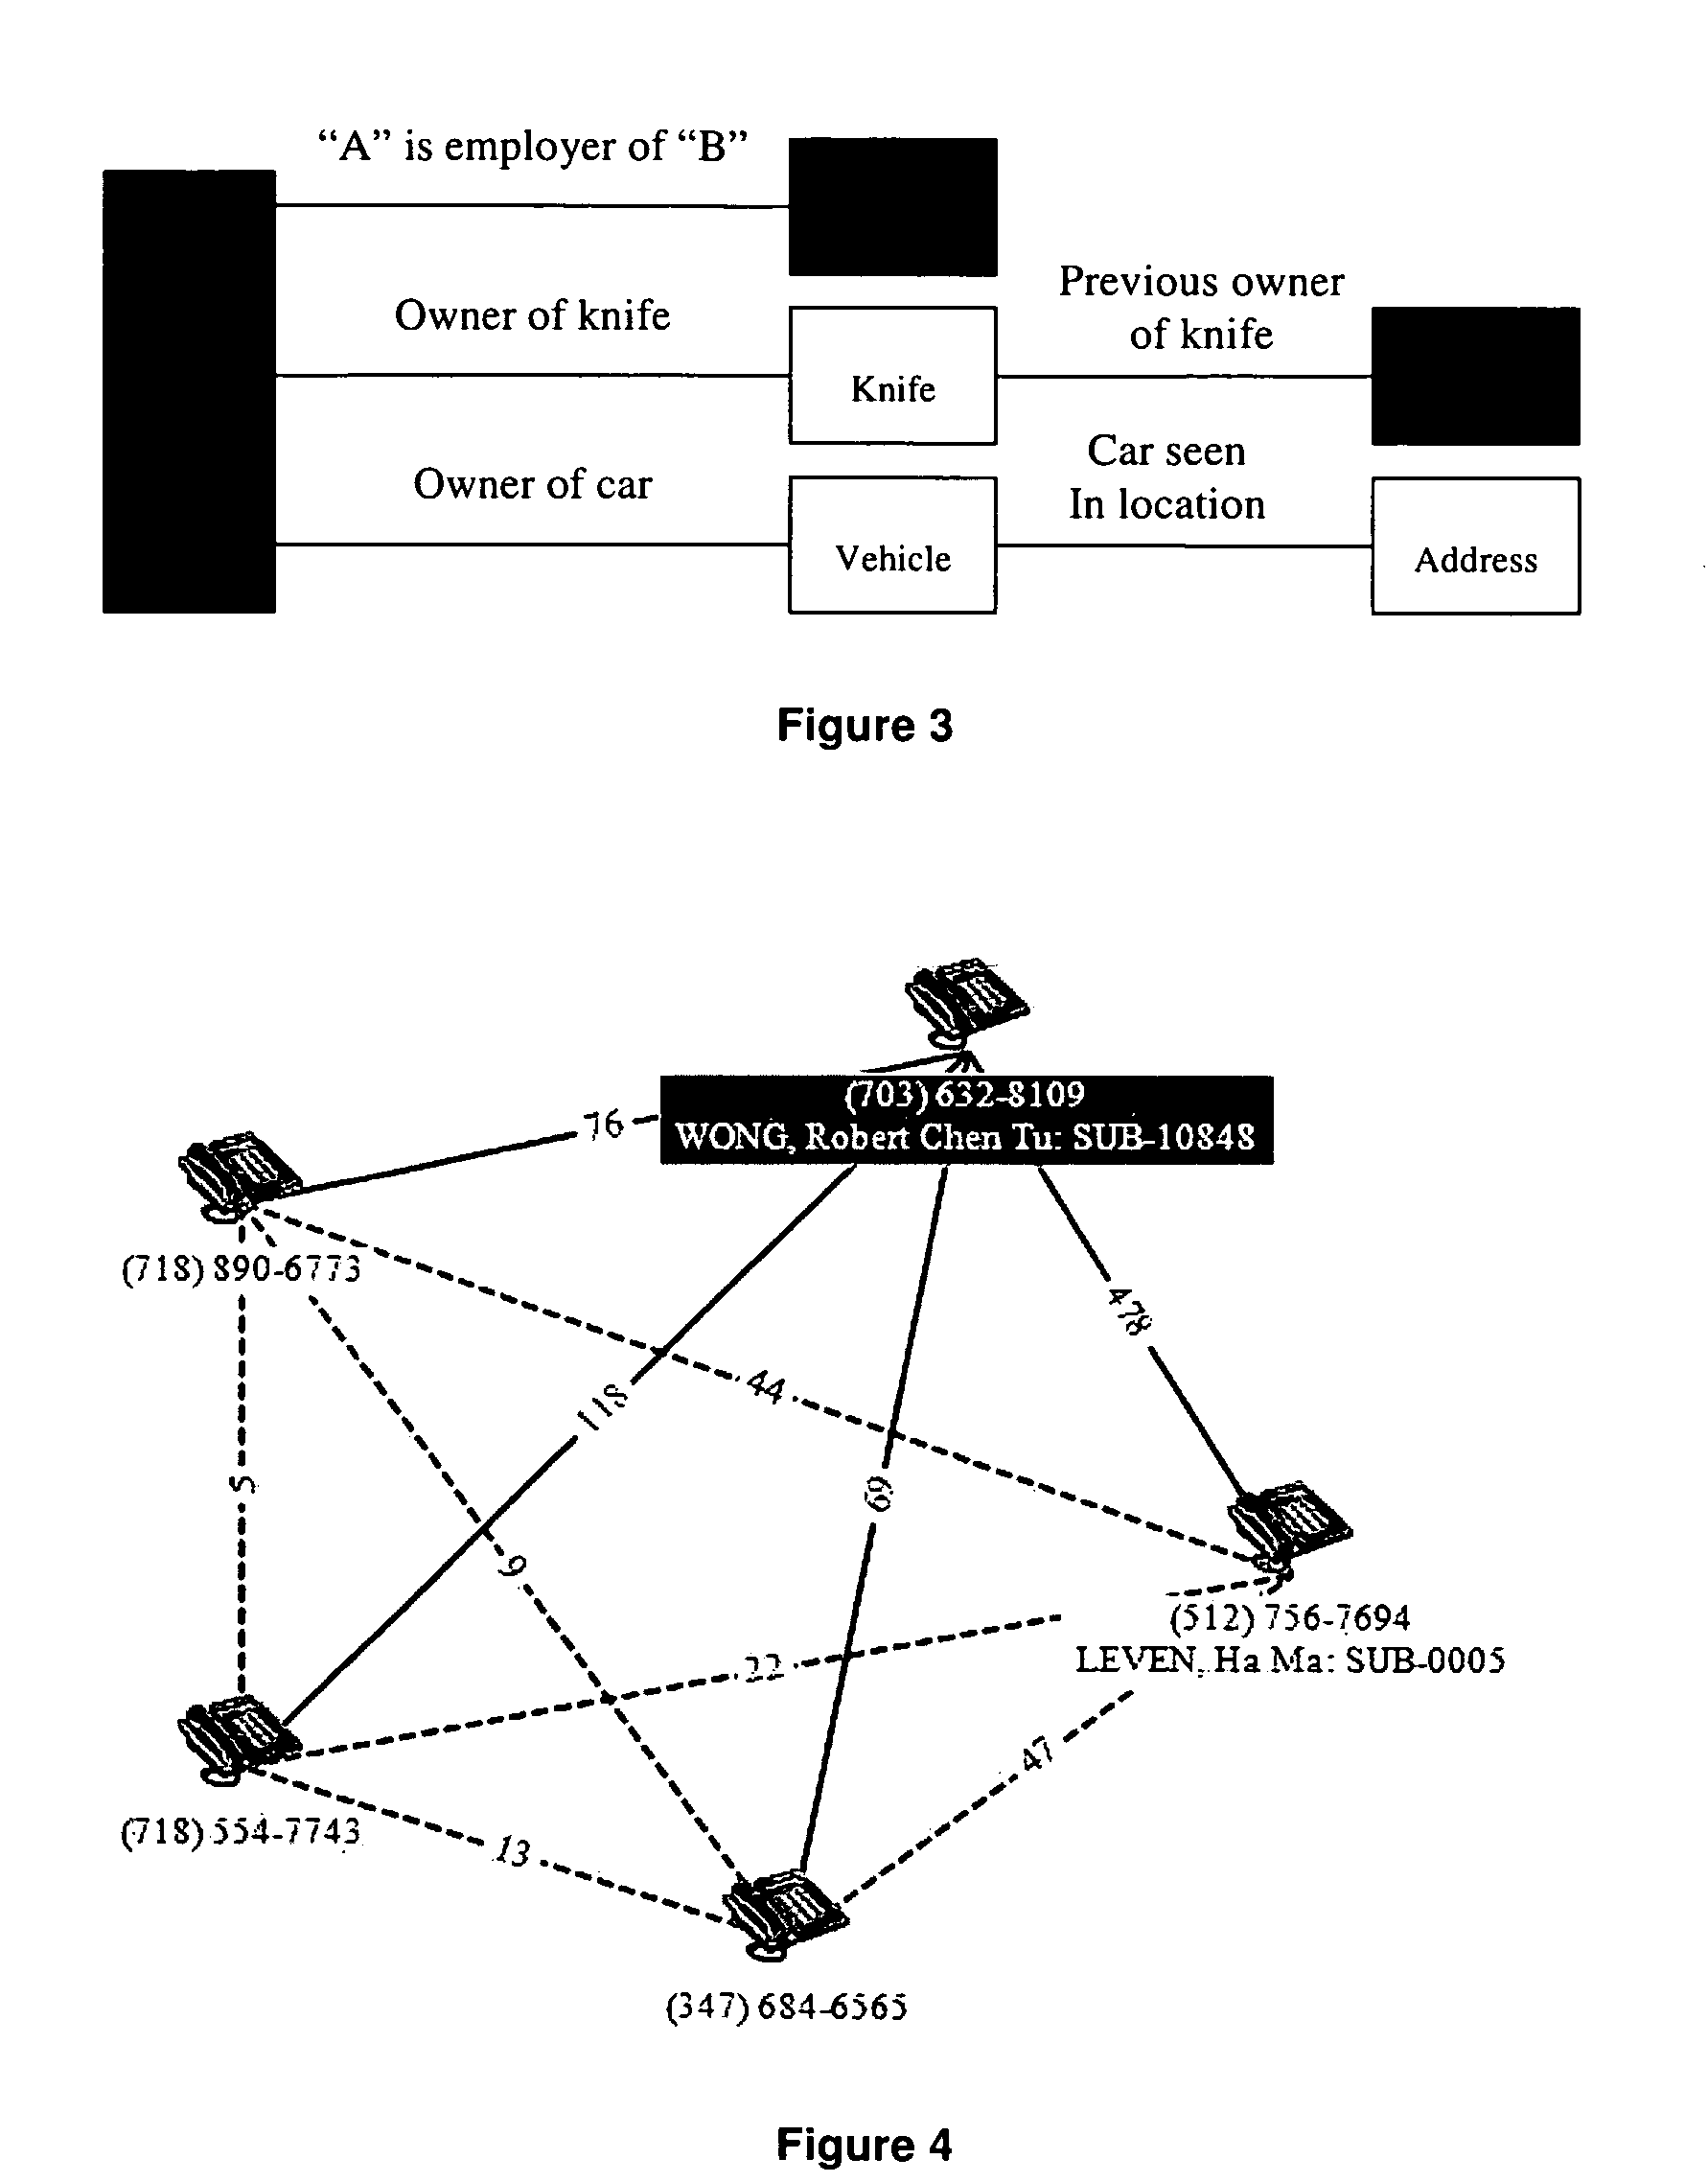 Apparatus and method for investigative analysis of law enforcement cases